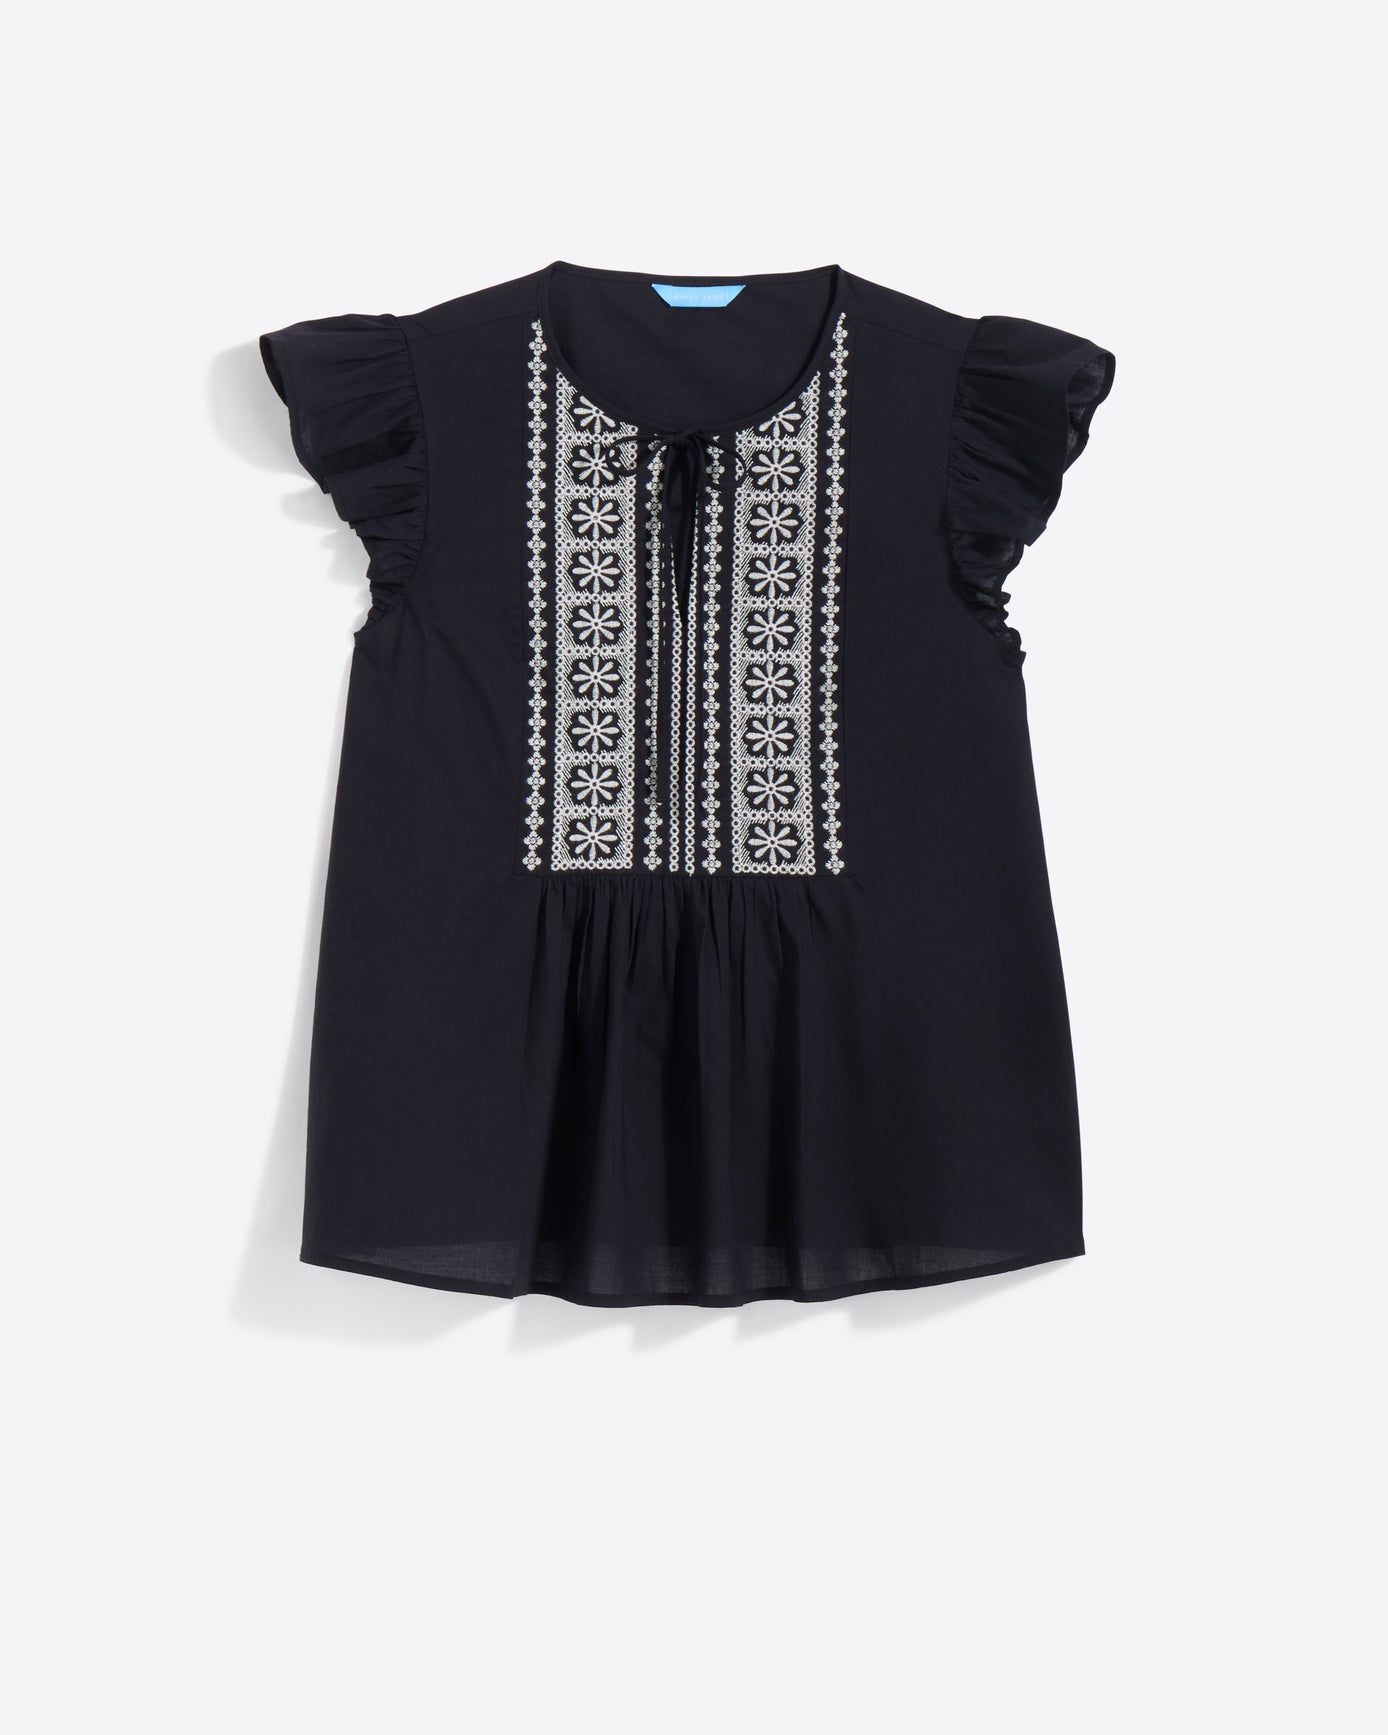 Ana Top in Embroidered Cotton